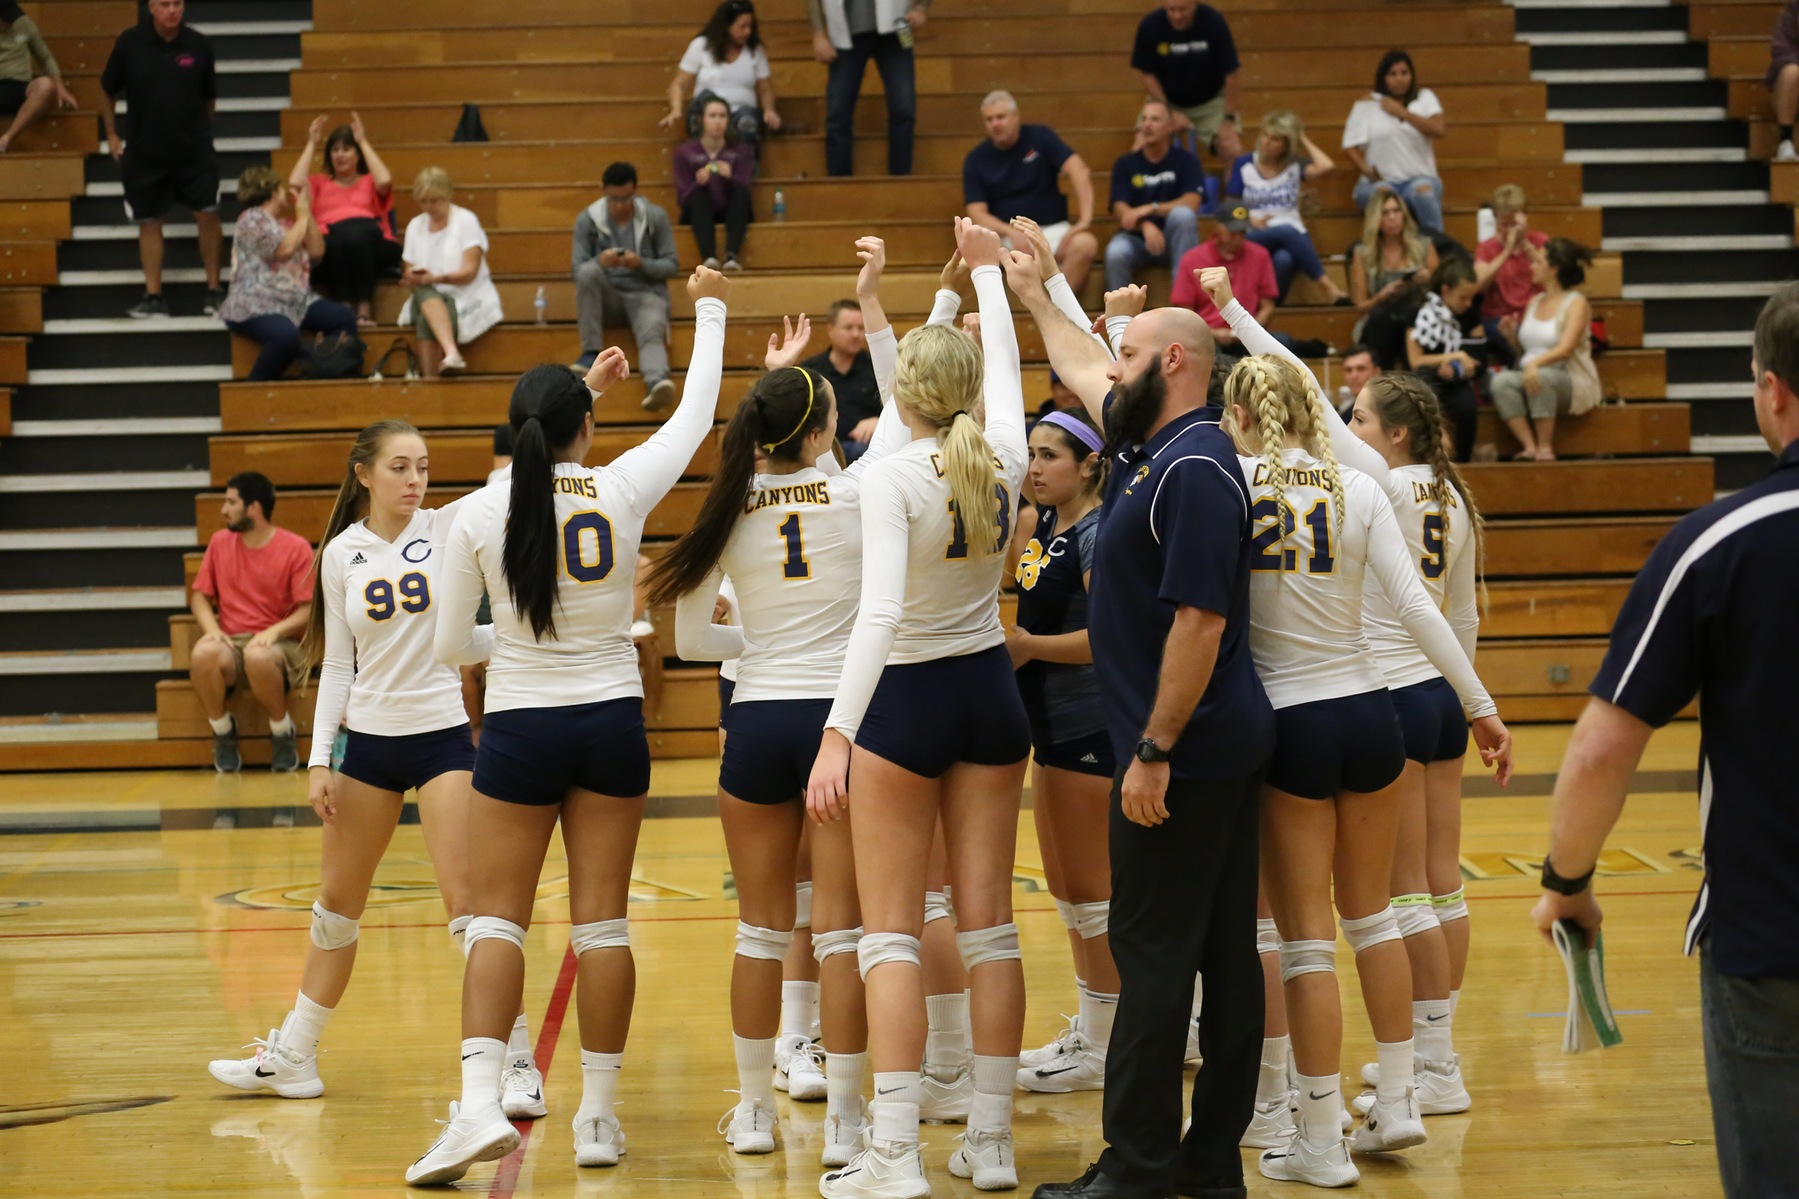 No. 5 Canyons Sweeps L.A. Mission 3-0 for Eighth Straight Win